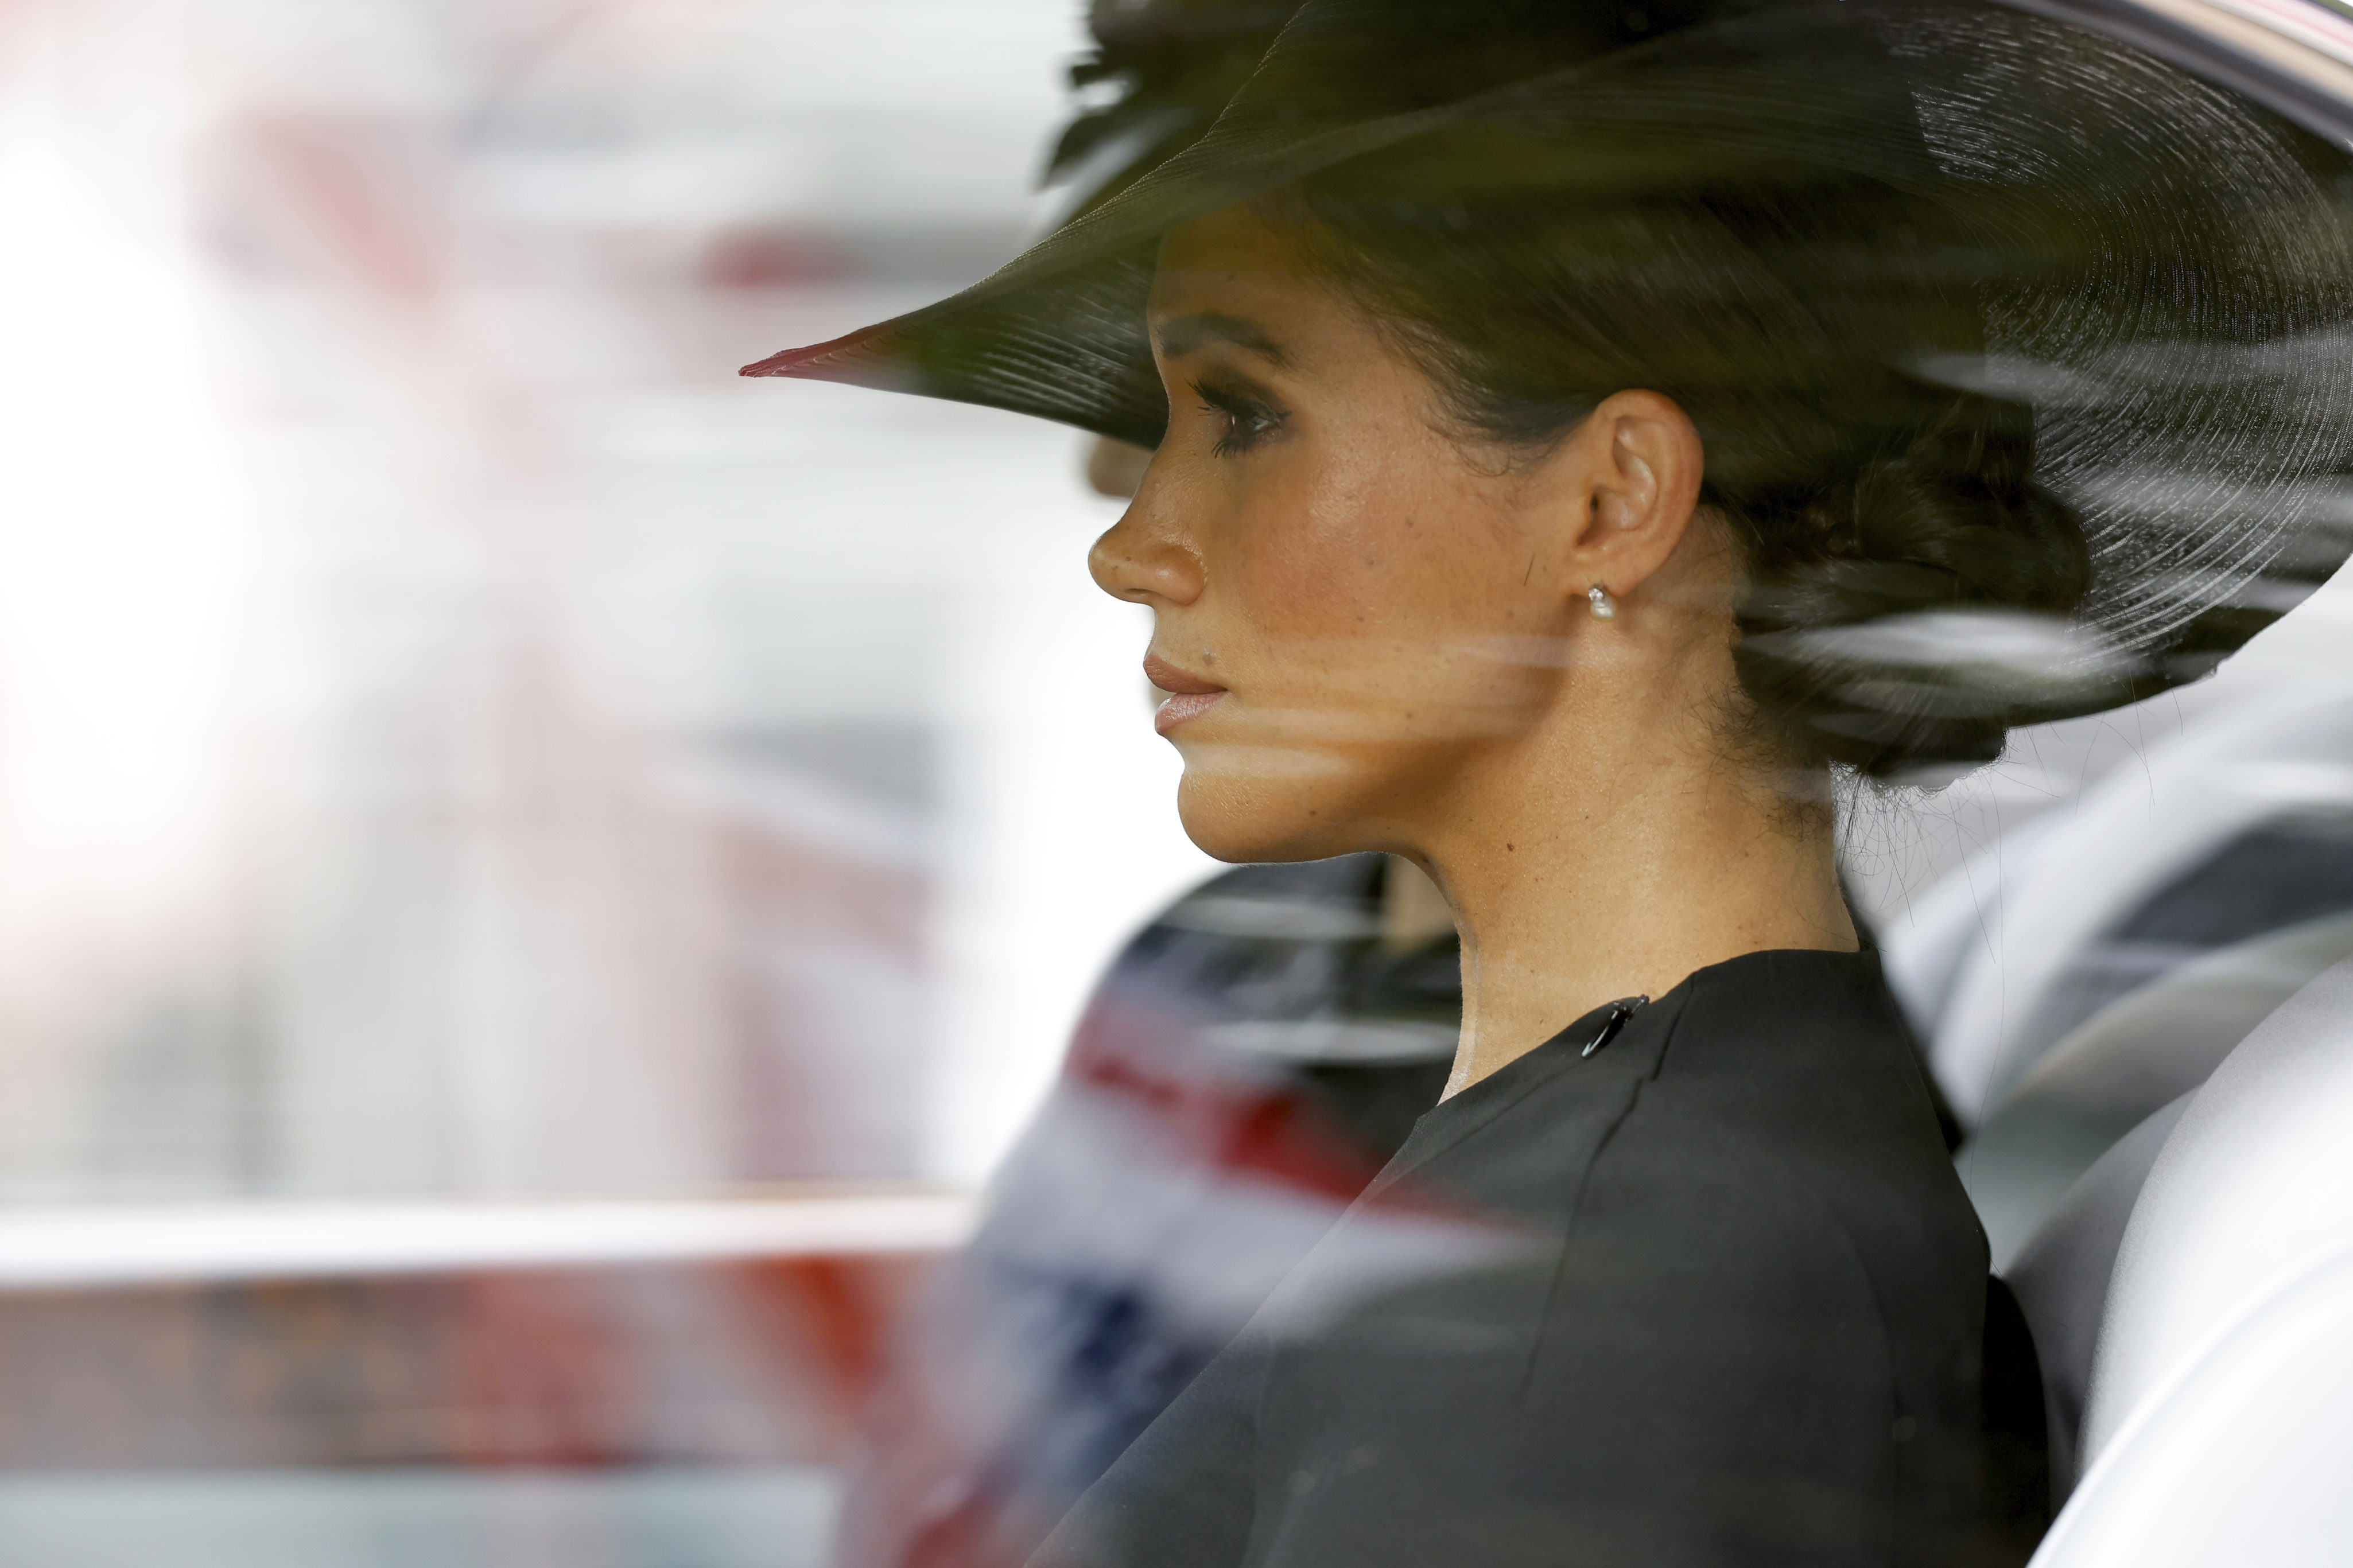 Meghan Markle Wore These Special Earrings to the Queen’s Funeral